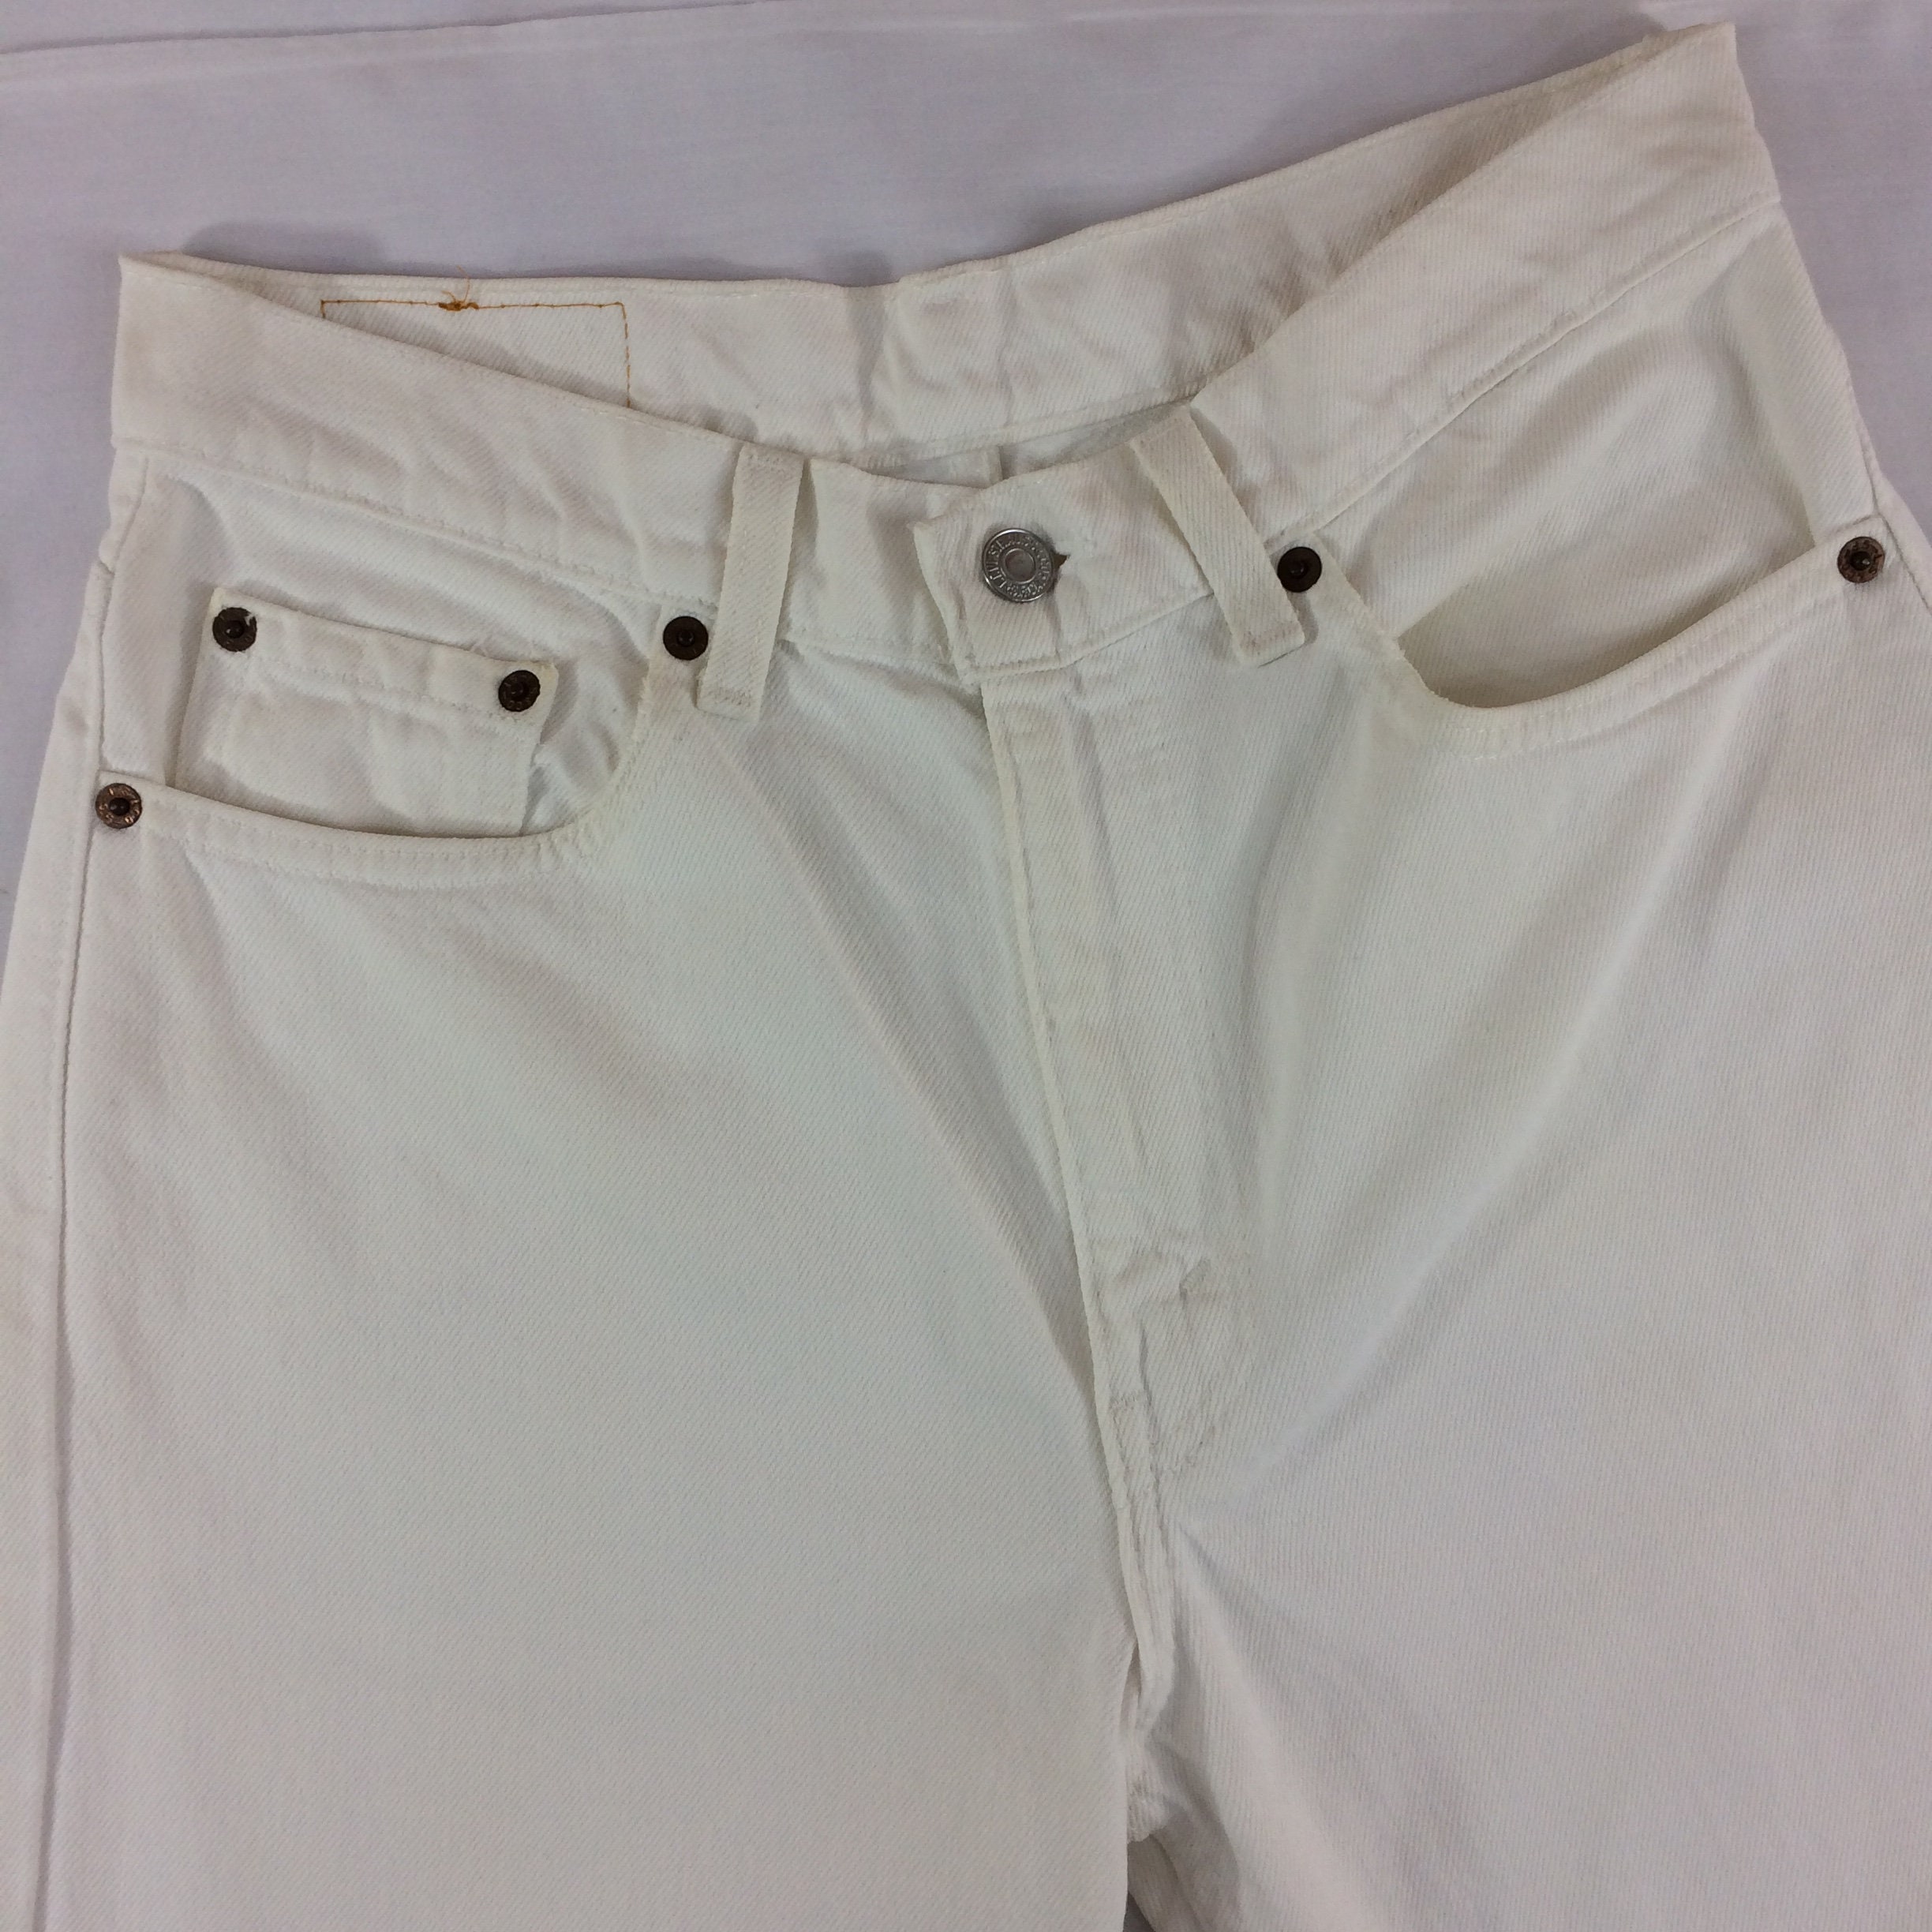 Sz 29 Vintage Levis 510 White Jeans W29 L33 High Waisted 90s | Etsy